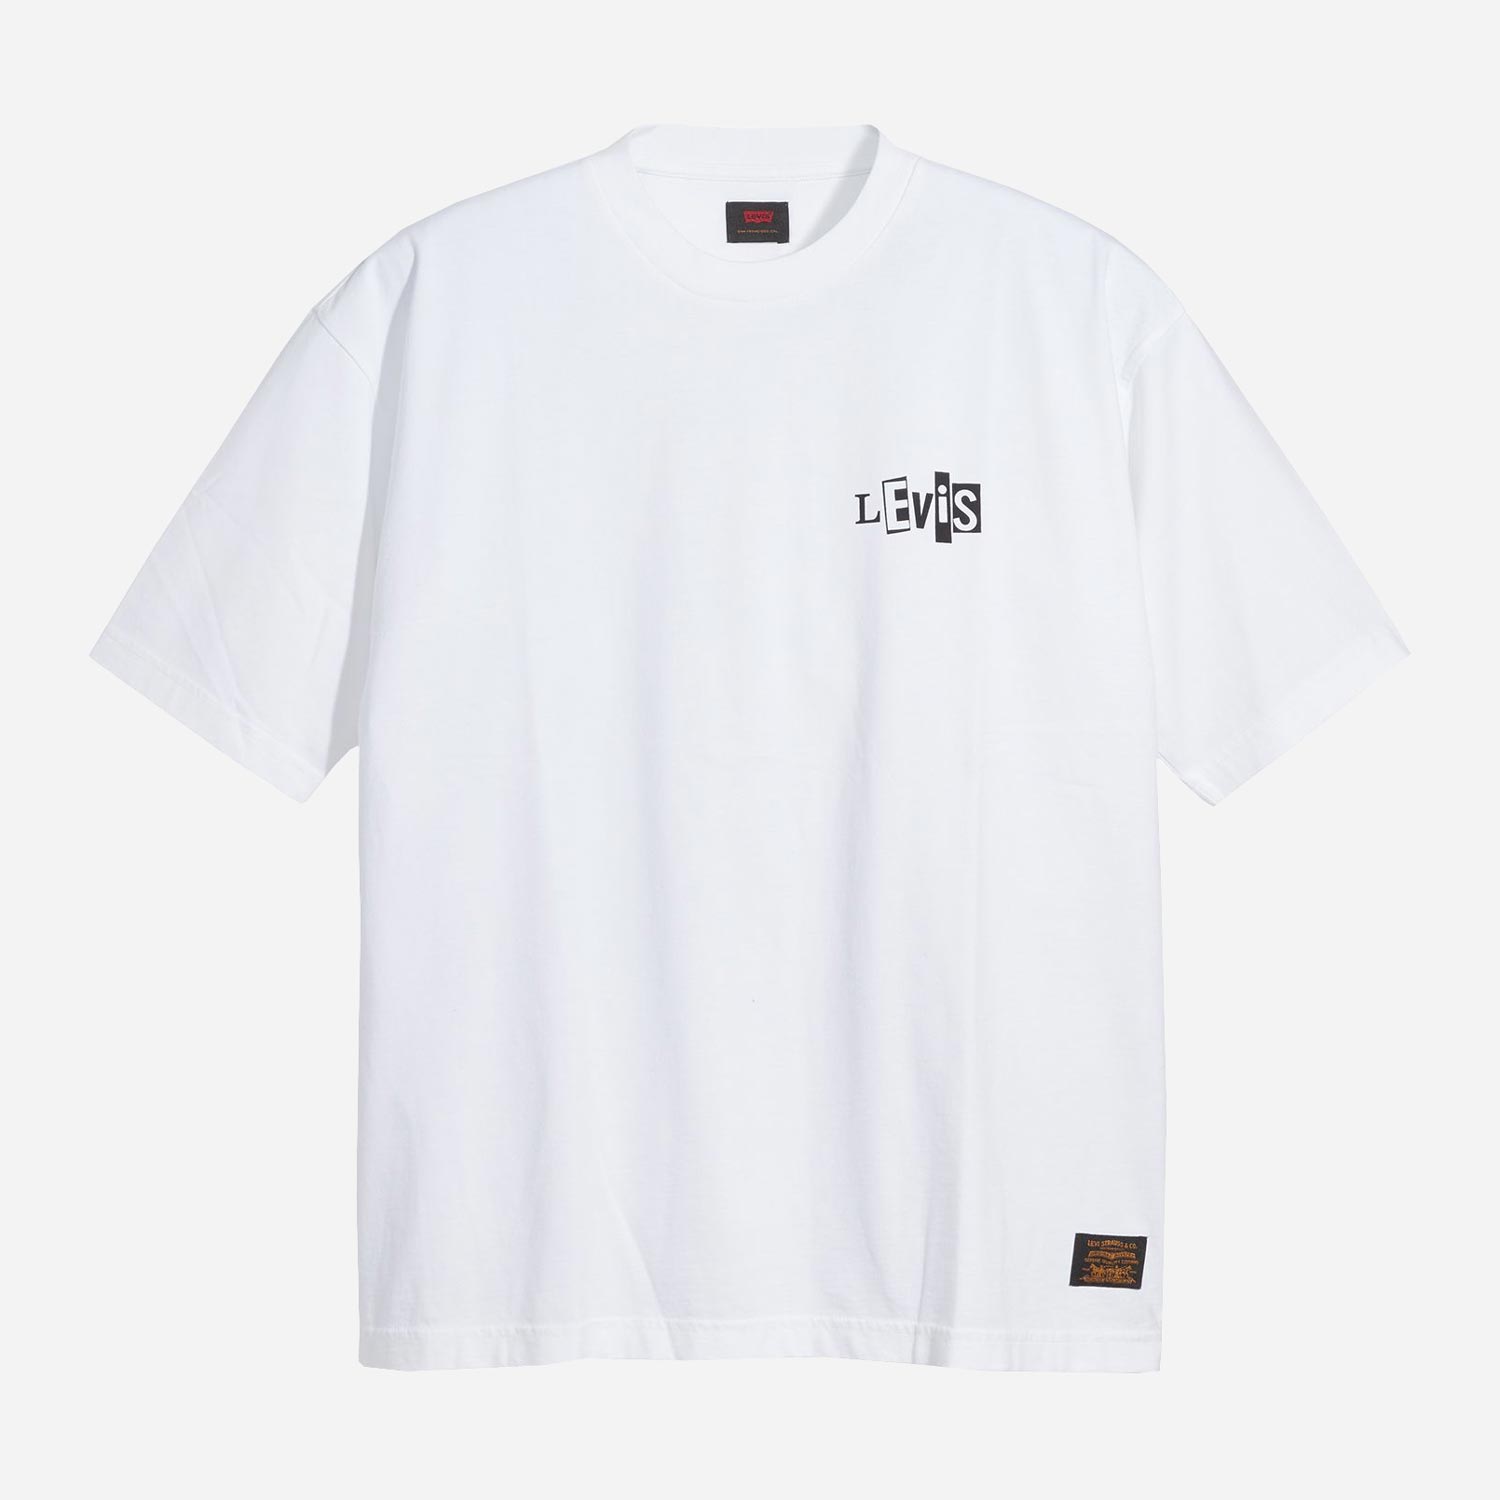 Levis Skateboarding Graphic Boxy Loose Fit Tee - White